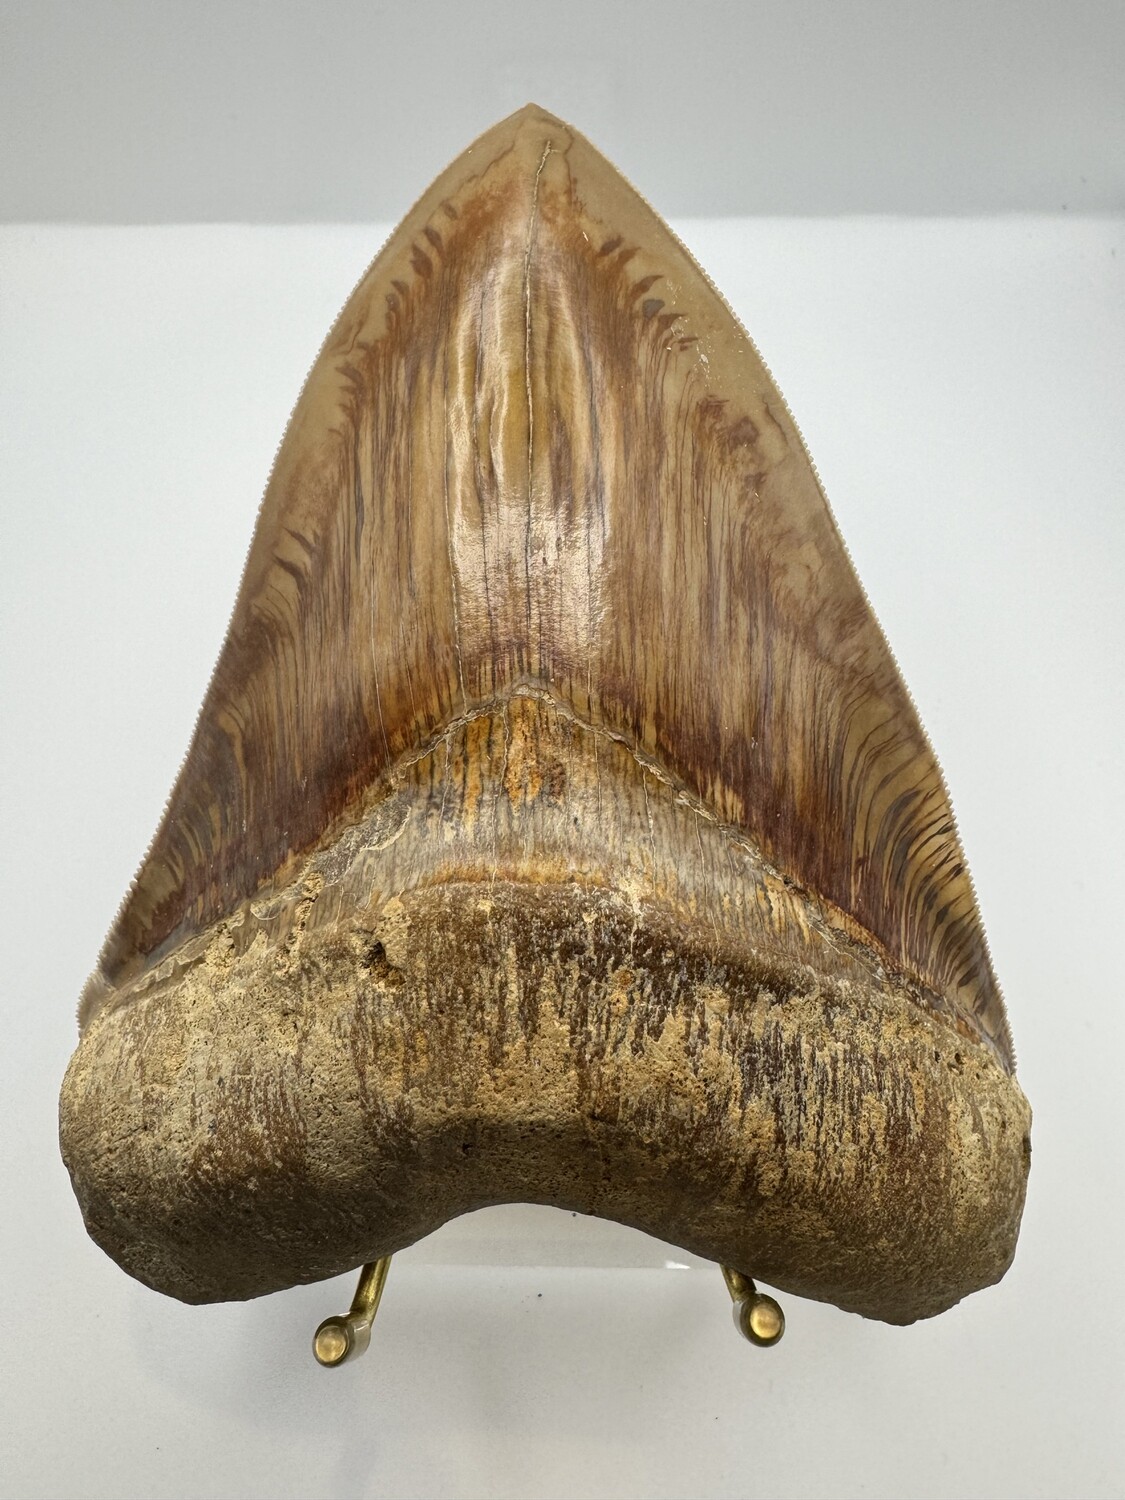 5.519” Flawless Orange and Brown Megalodon tooth fossil